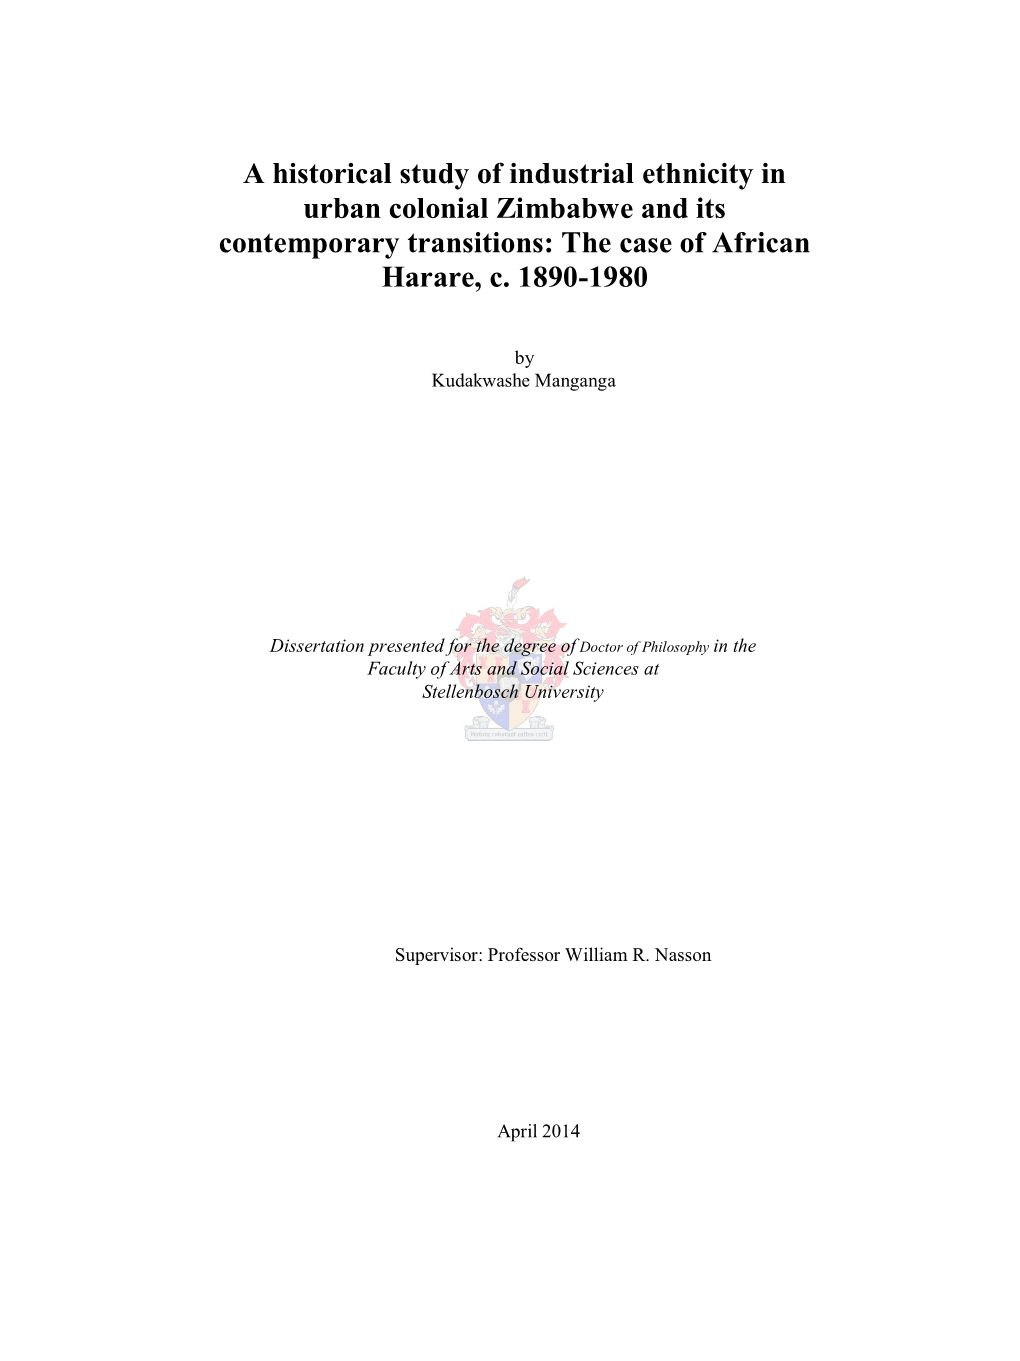 A Historical Study of Industrial Ethnicity in Urban Colonial Zimbabwe and Its Contemporary Transitions: the Case of African Harare, C